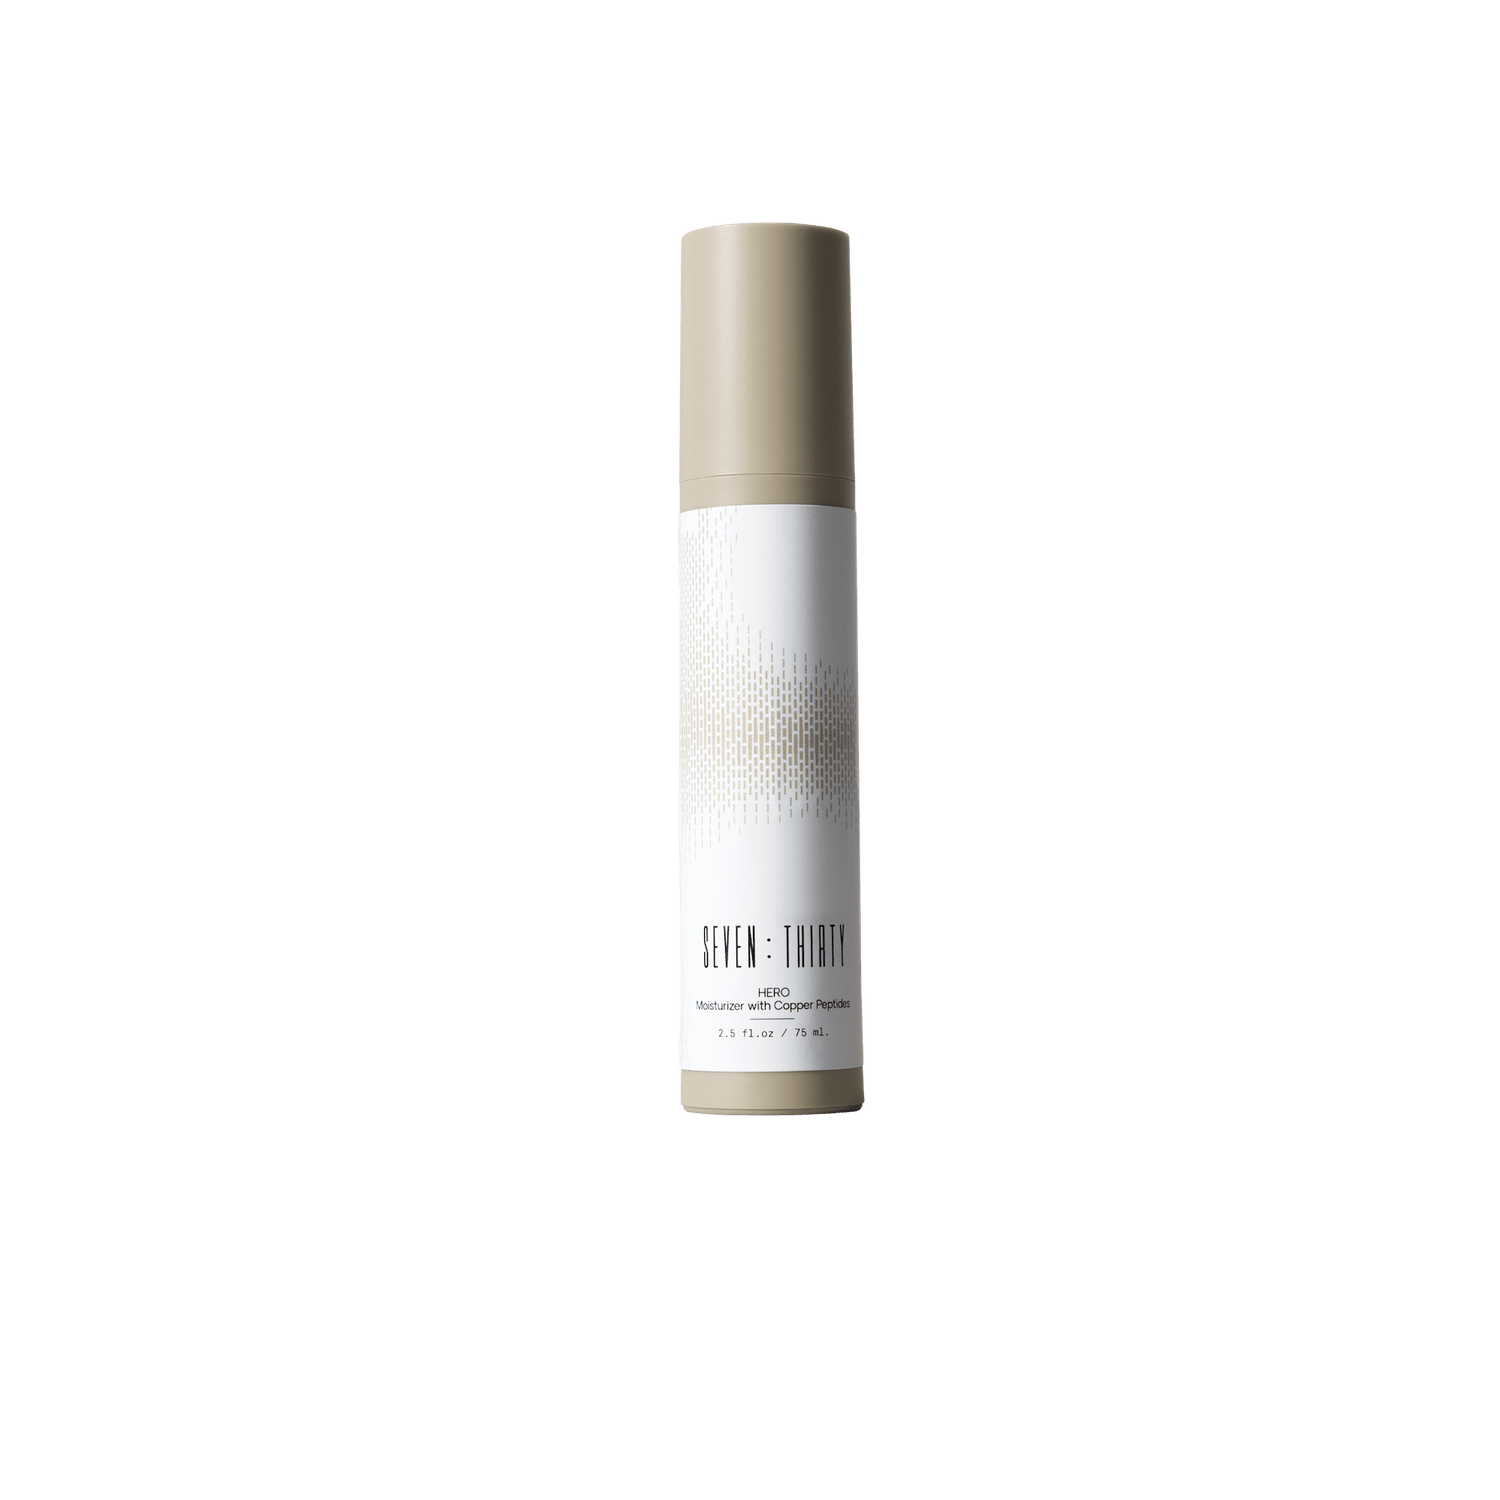 HERO Moisturizer with Copper Peptides on a white background